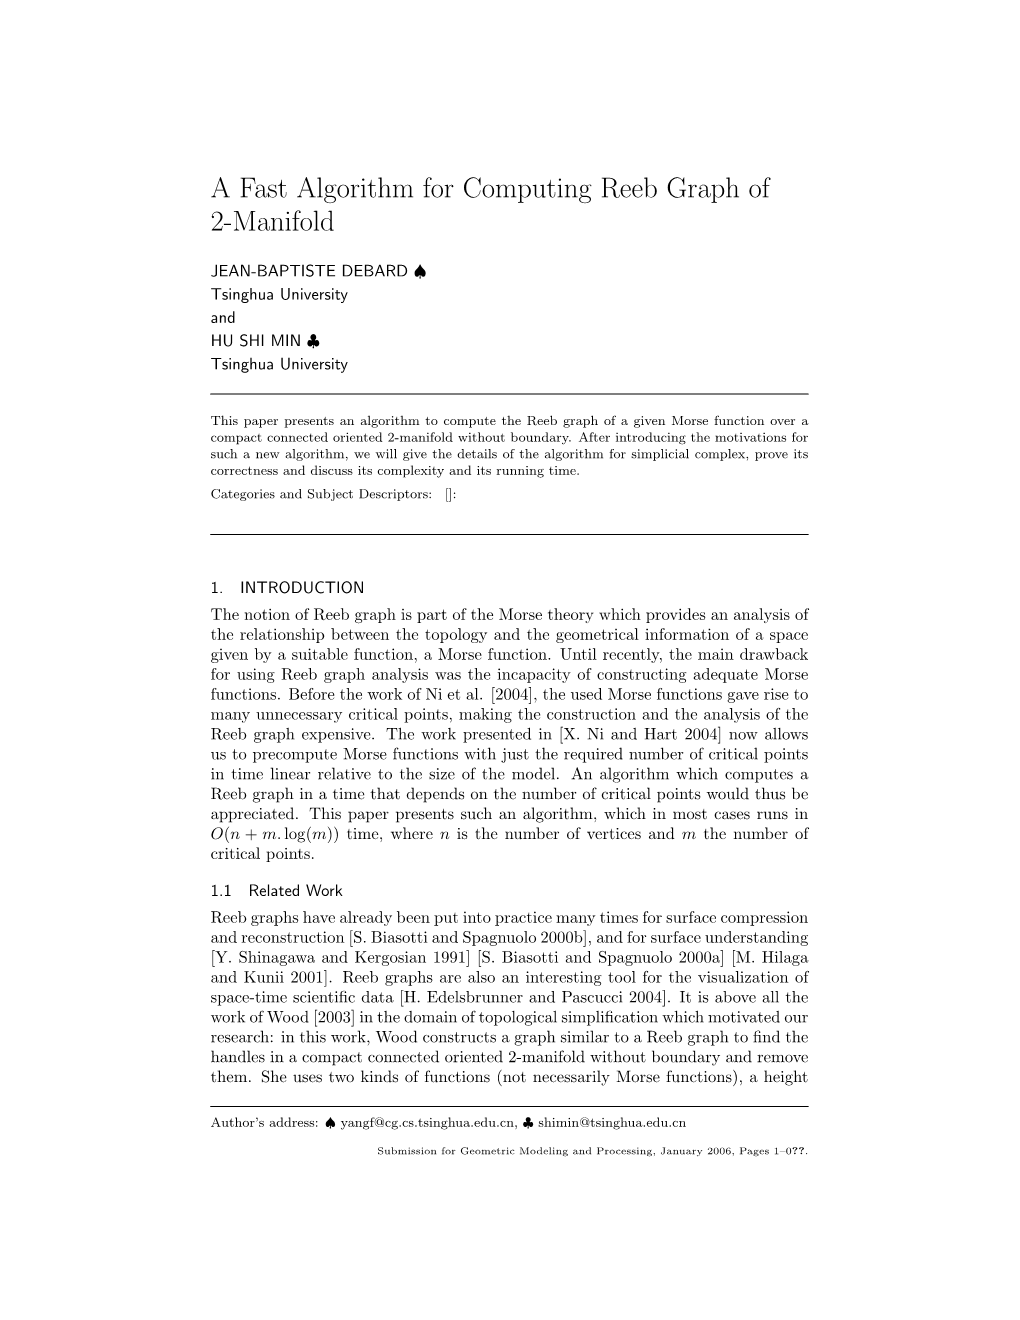 A Fast Algorithm for Computing Reeb Graph of 2-Manifold